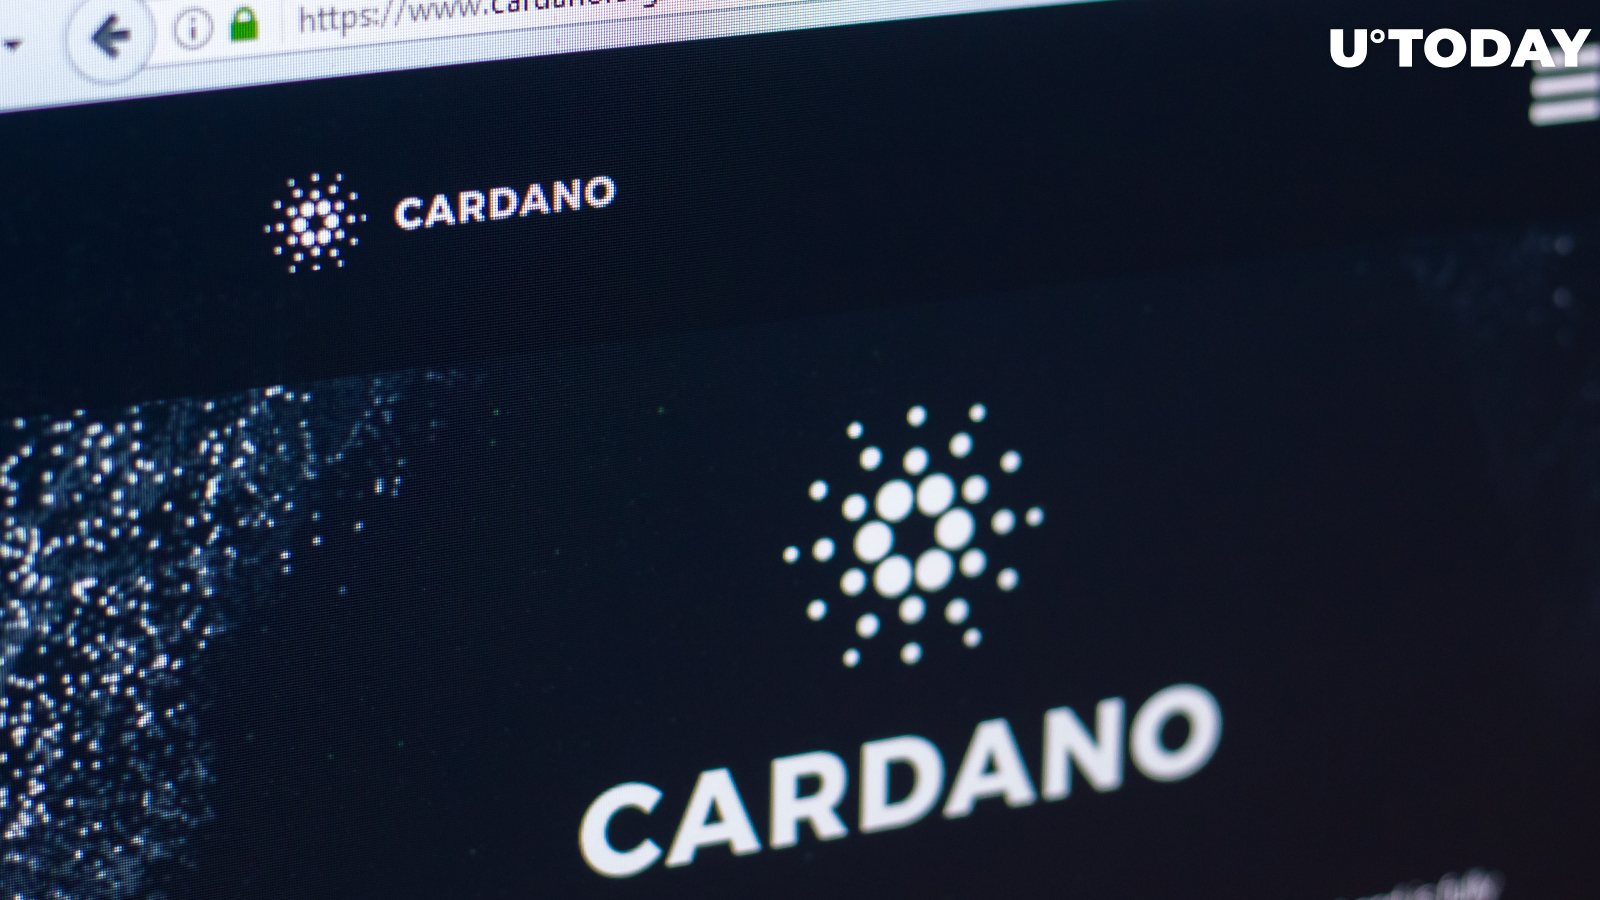 Fortune 500 Companies and 1 Billion Users: Cardano Foundation Shares Its Goals for Next 5 Years